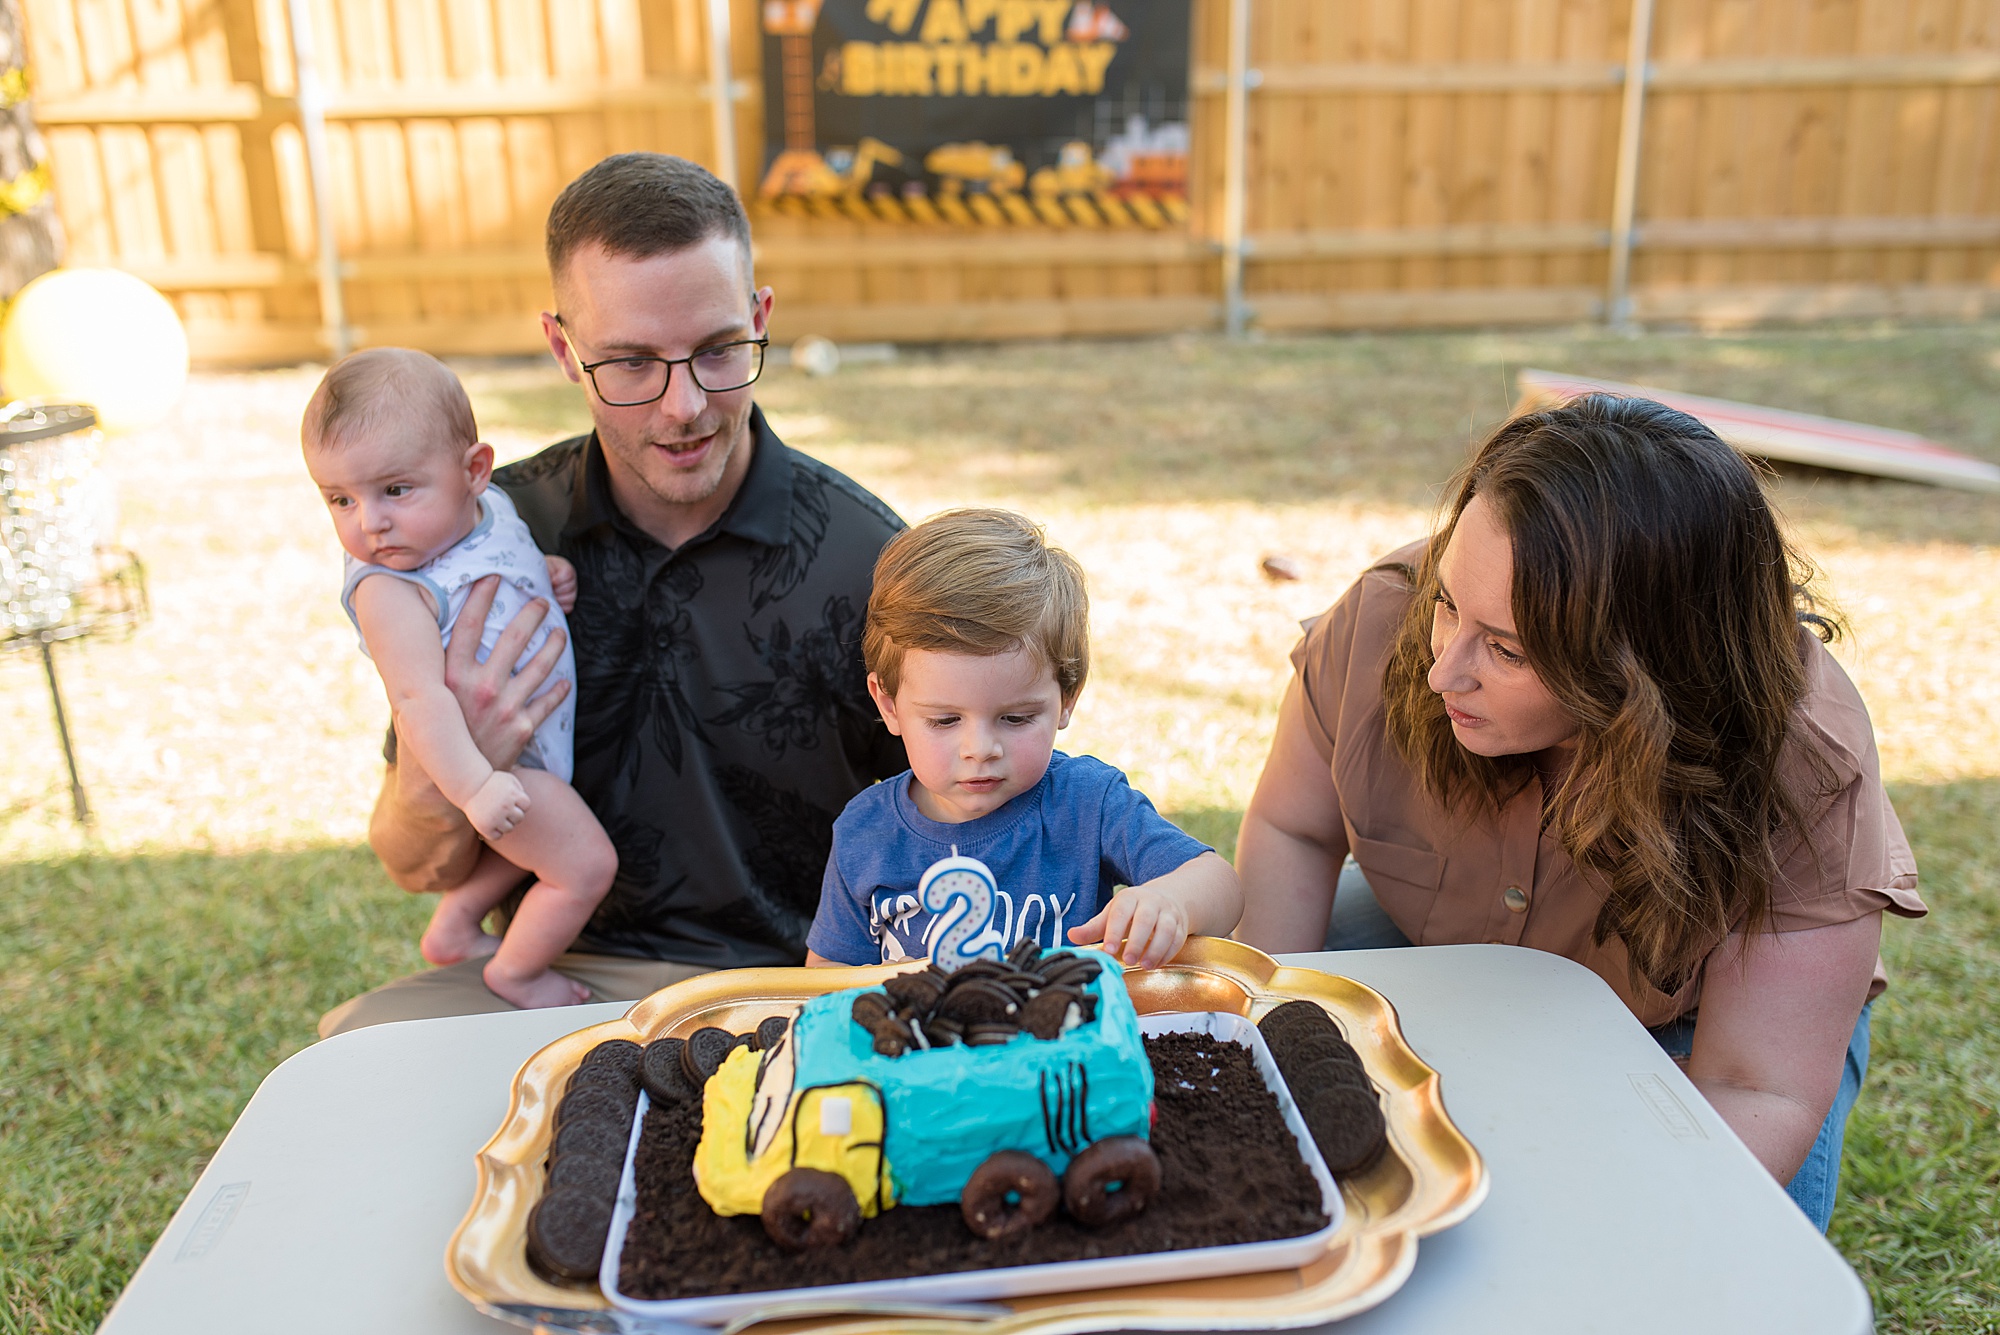 birthday boy looks at his birthday cake with his family